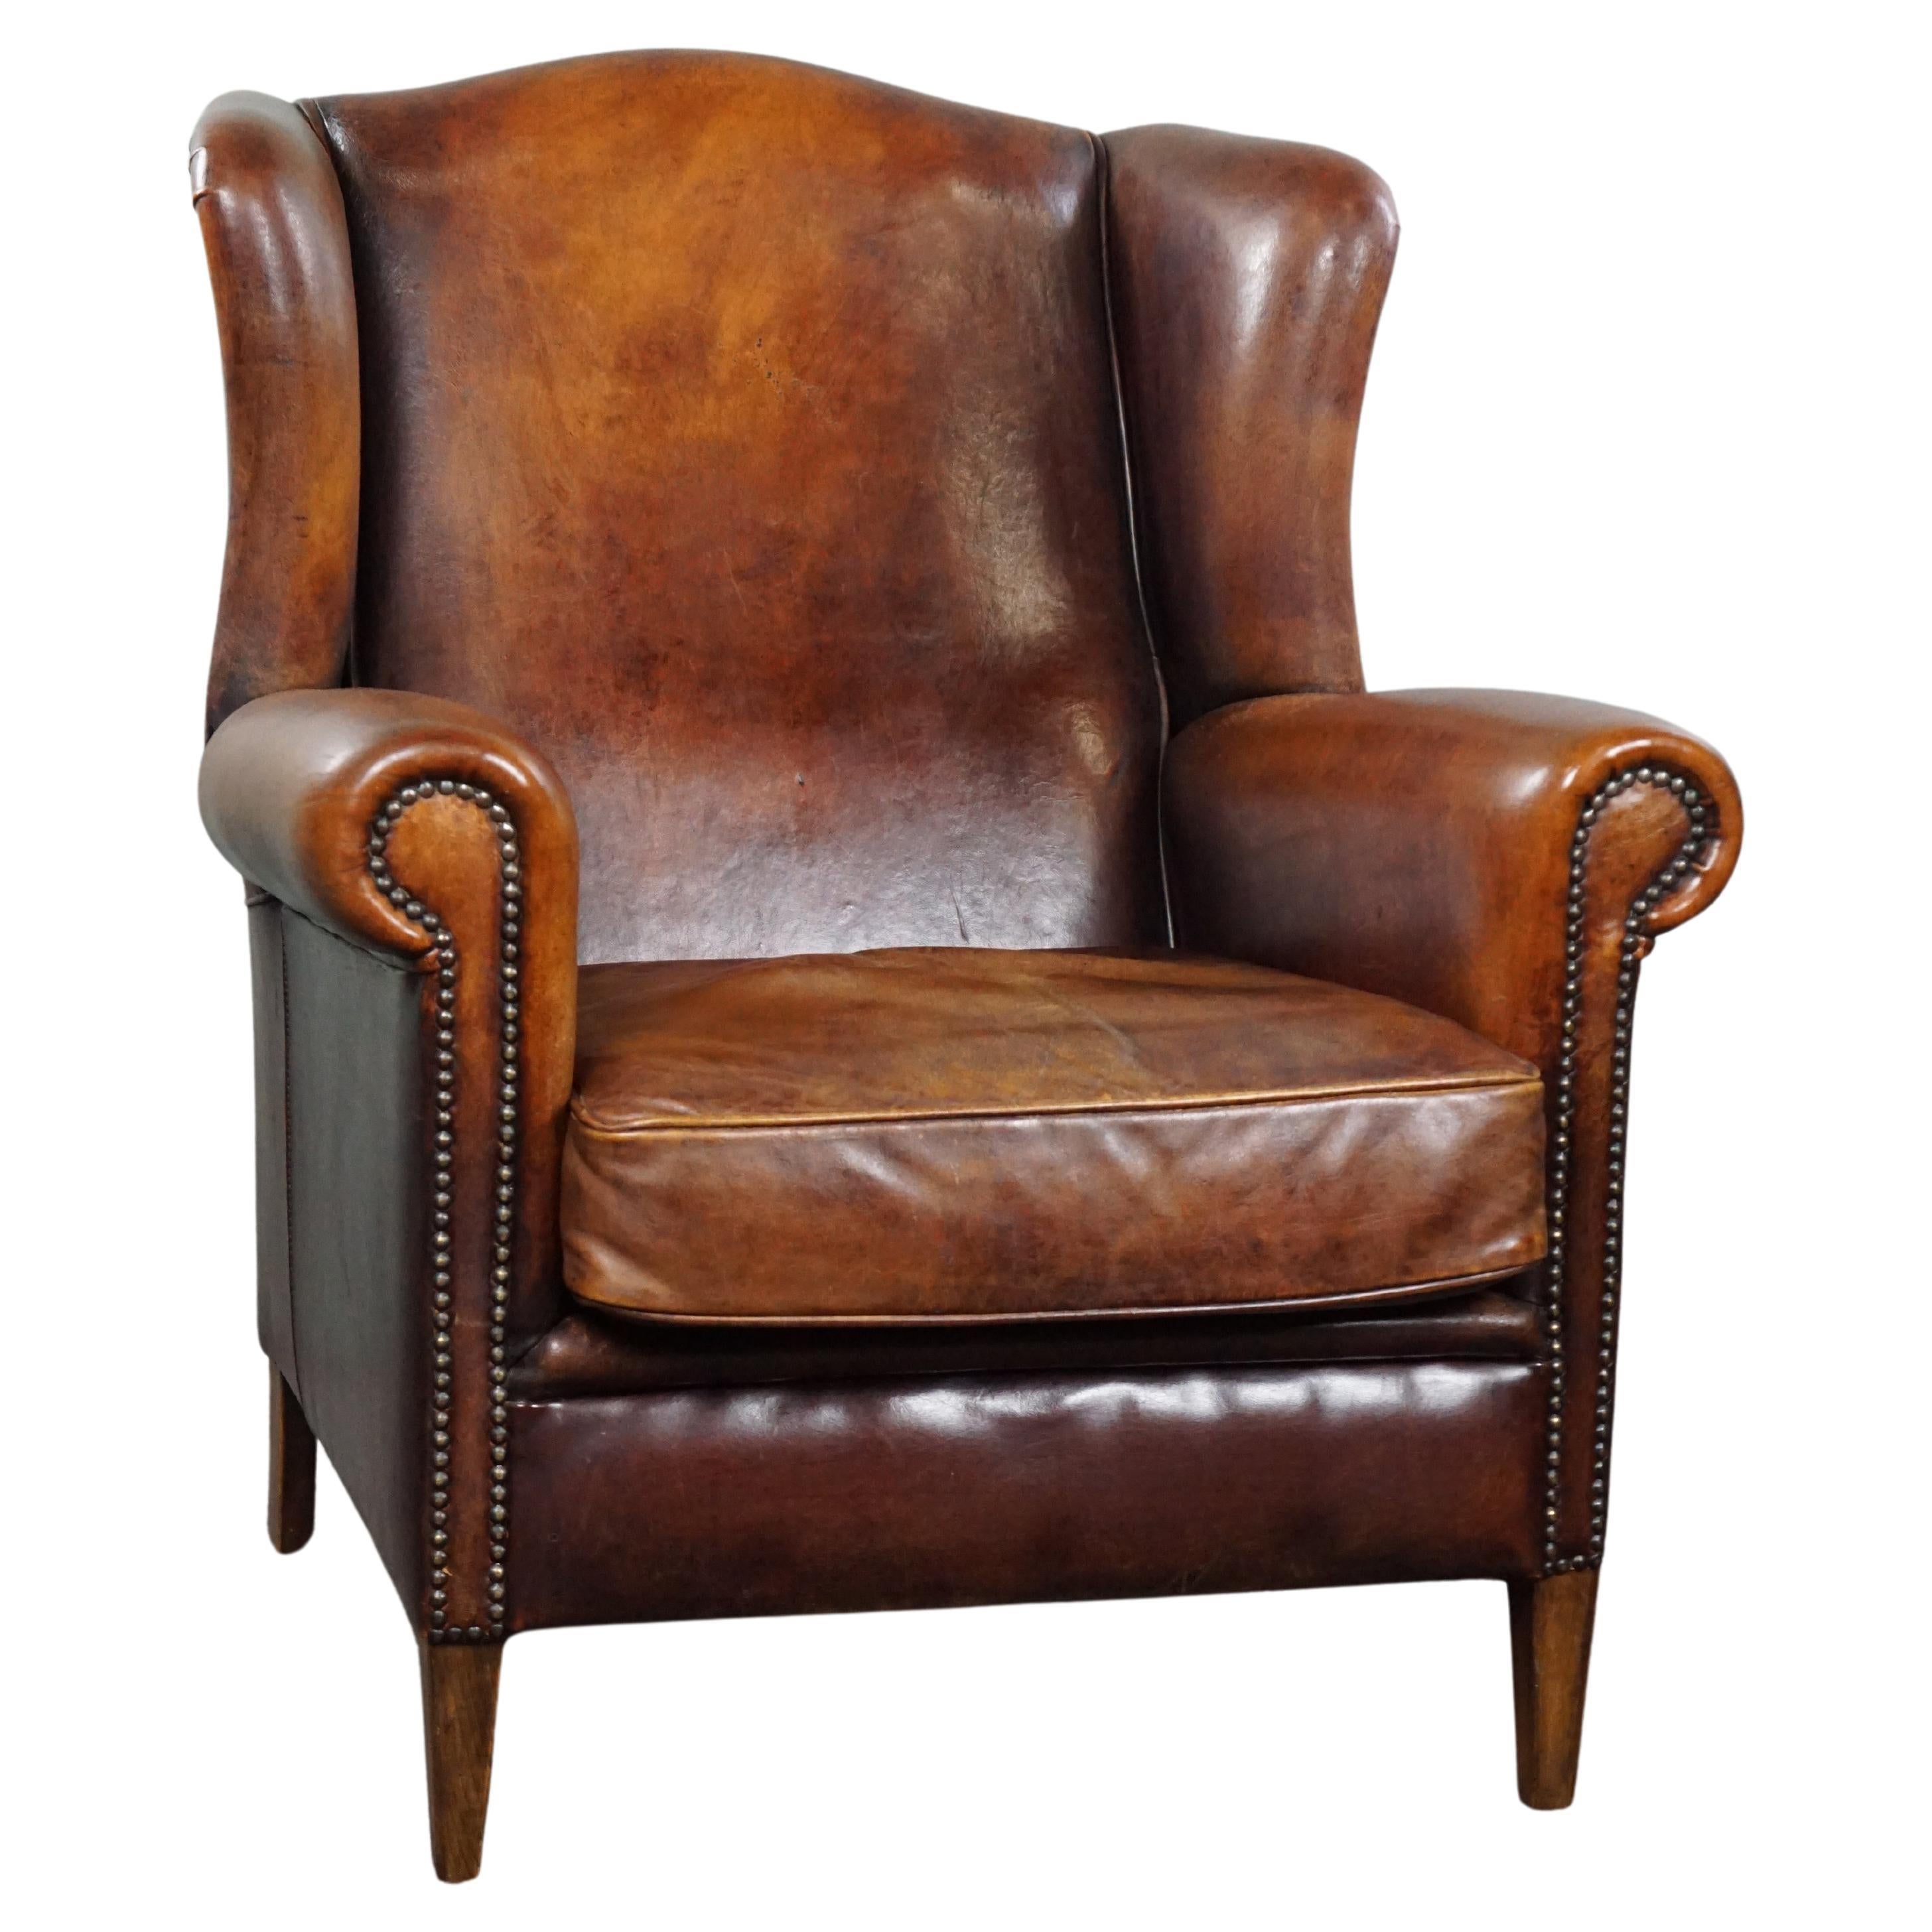 Comfortable sheep leather wingback chair with unbelievably warm colors For Sale